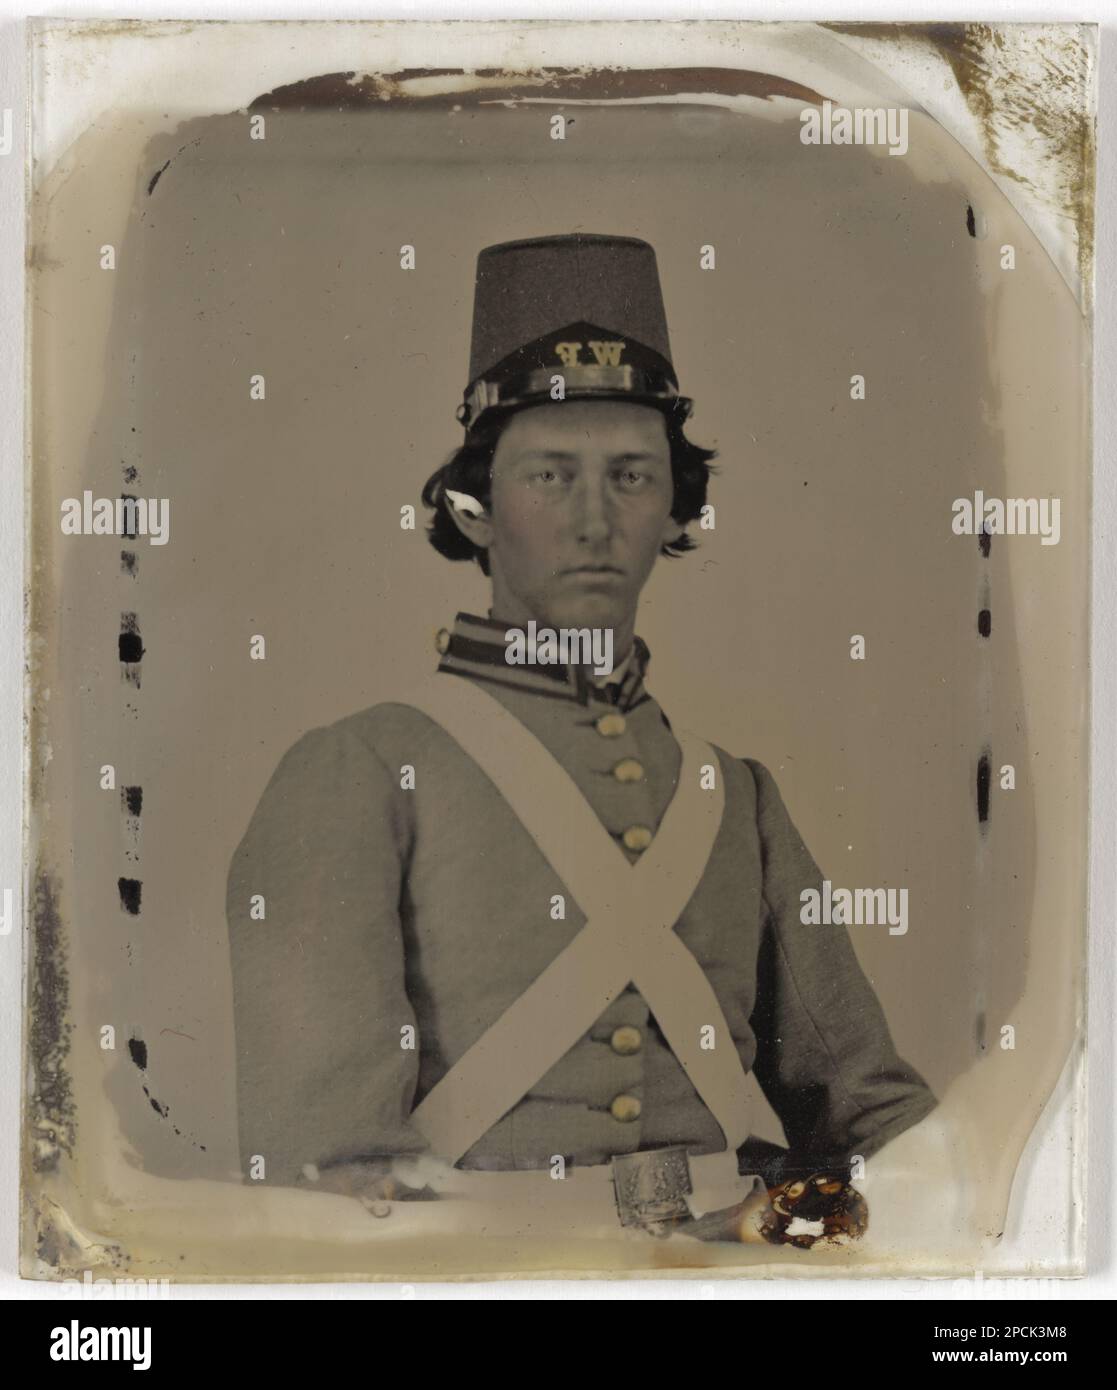 Sergeant Elijah McClanahan Ingles of Co. G, 4th Virginia Infantry Regiment in uniform, cap with 'WF' (Wise Fencibles), and Virginia seal belt buckle. Liljenquist Family Collection of Civil War Photographs , FAmbrotype/Tintype photograph filing series , pp/liljconfed. Ingles, Elijah McClanahan, 1840-1924, Confederate States of America, Army, Virginia Infantry Regiment, 4th, People, 1860-1870, Soldiers, Confederate, 1860-1870, Military uniforms, Confederate, 1860-1870, United States, History, Civil War, 1861-1865, Military personnel, Confederate. Stock Photo